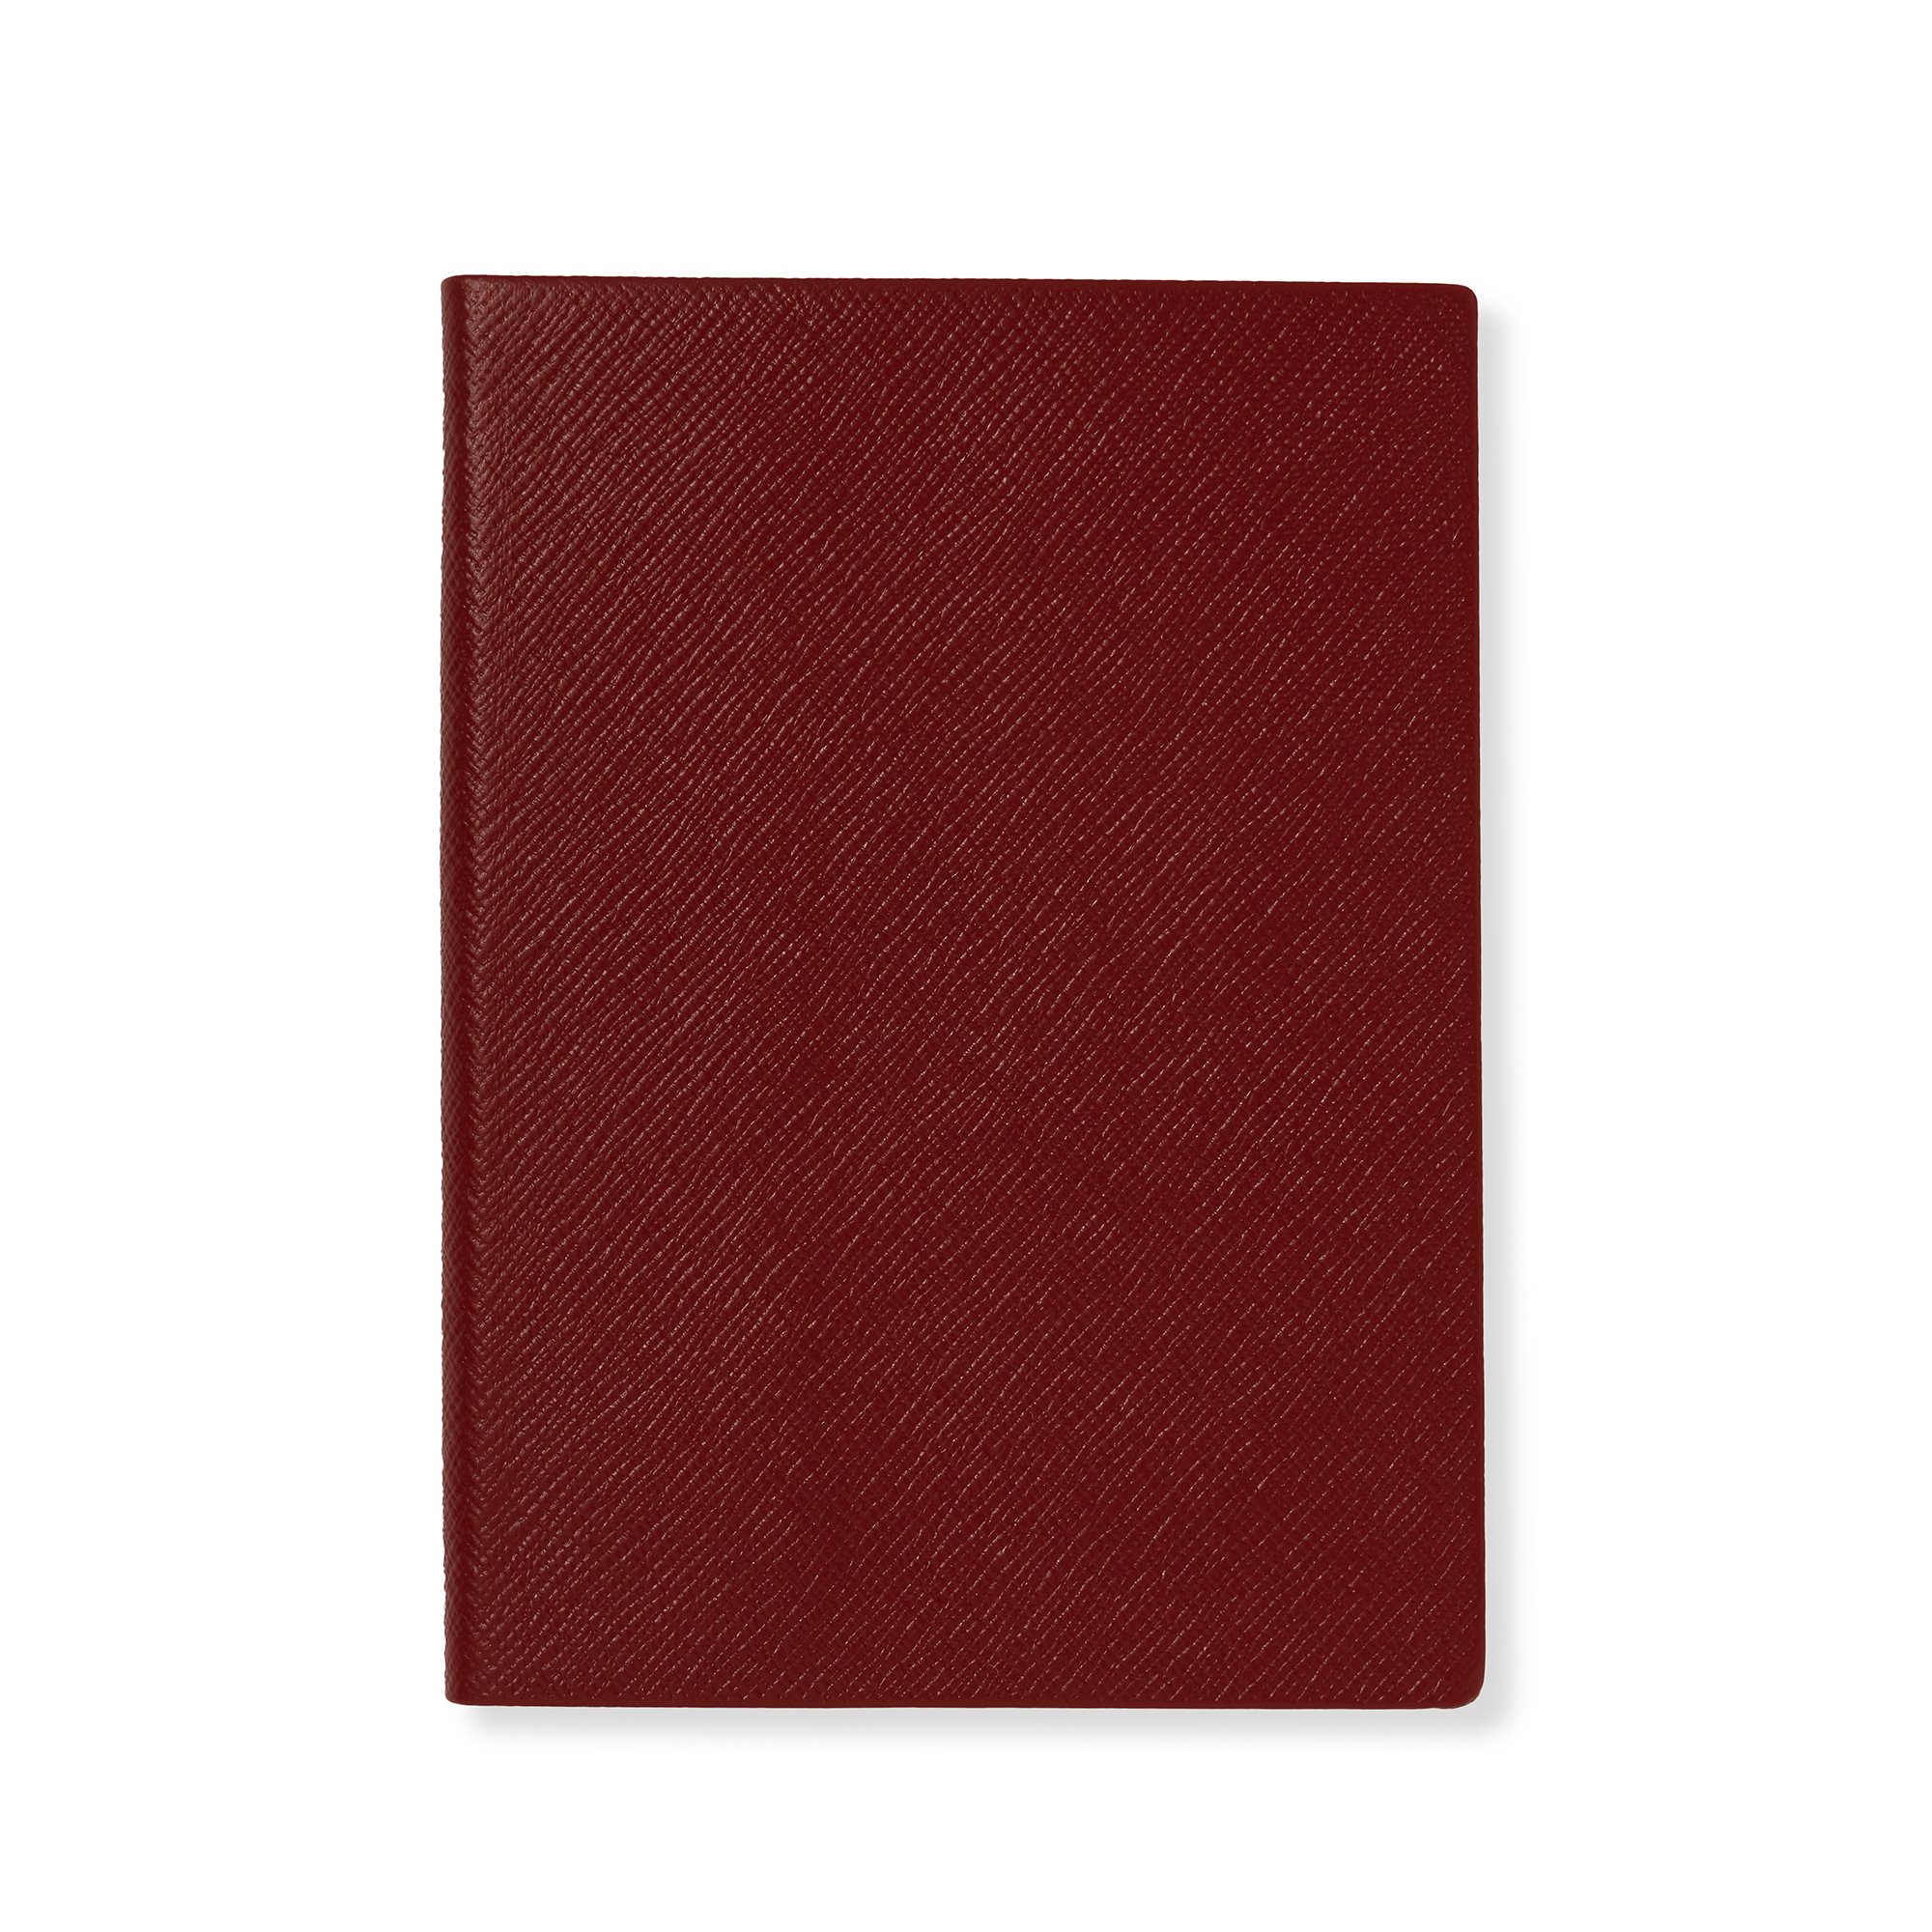 Smythson Soho Notebook In Panama In Red